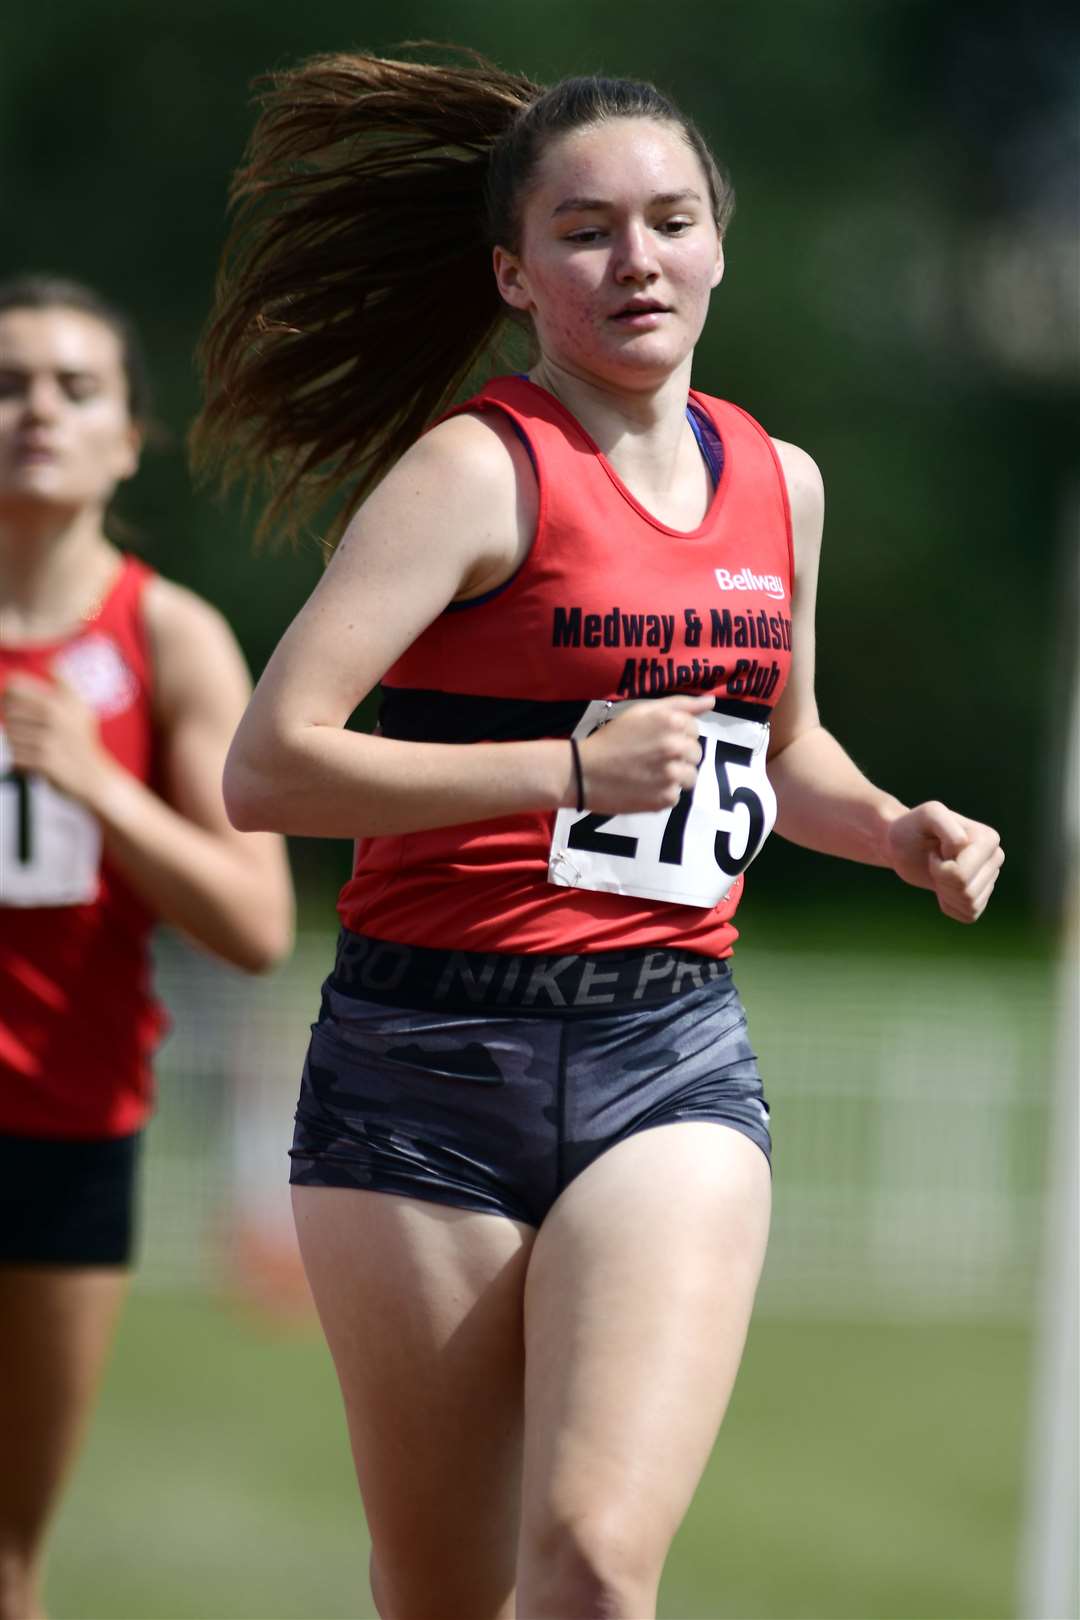 Abigail Royden (Medway) in the 1500m Picture: Barry Goodwin